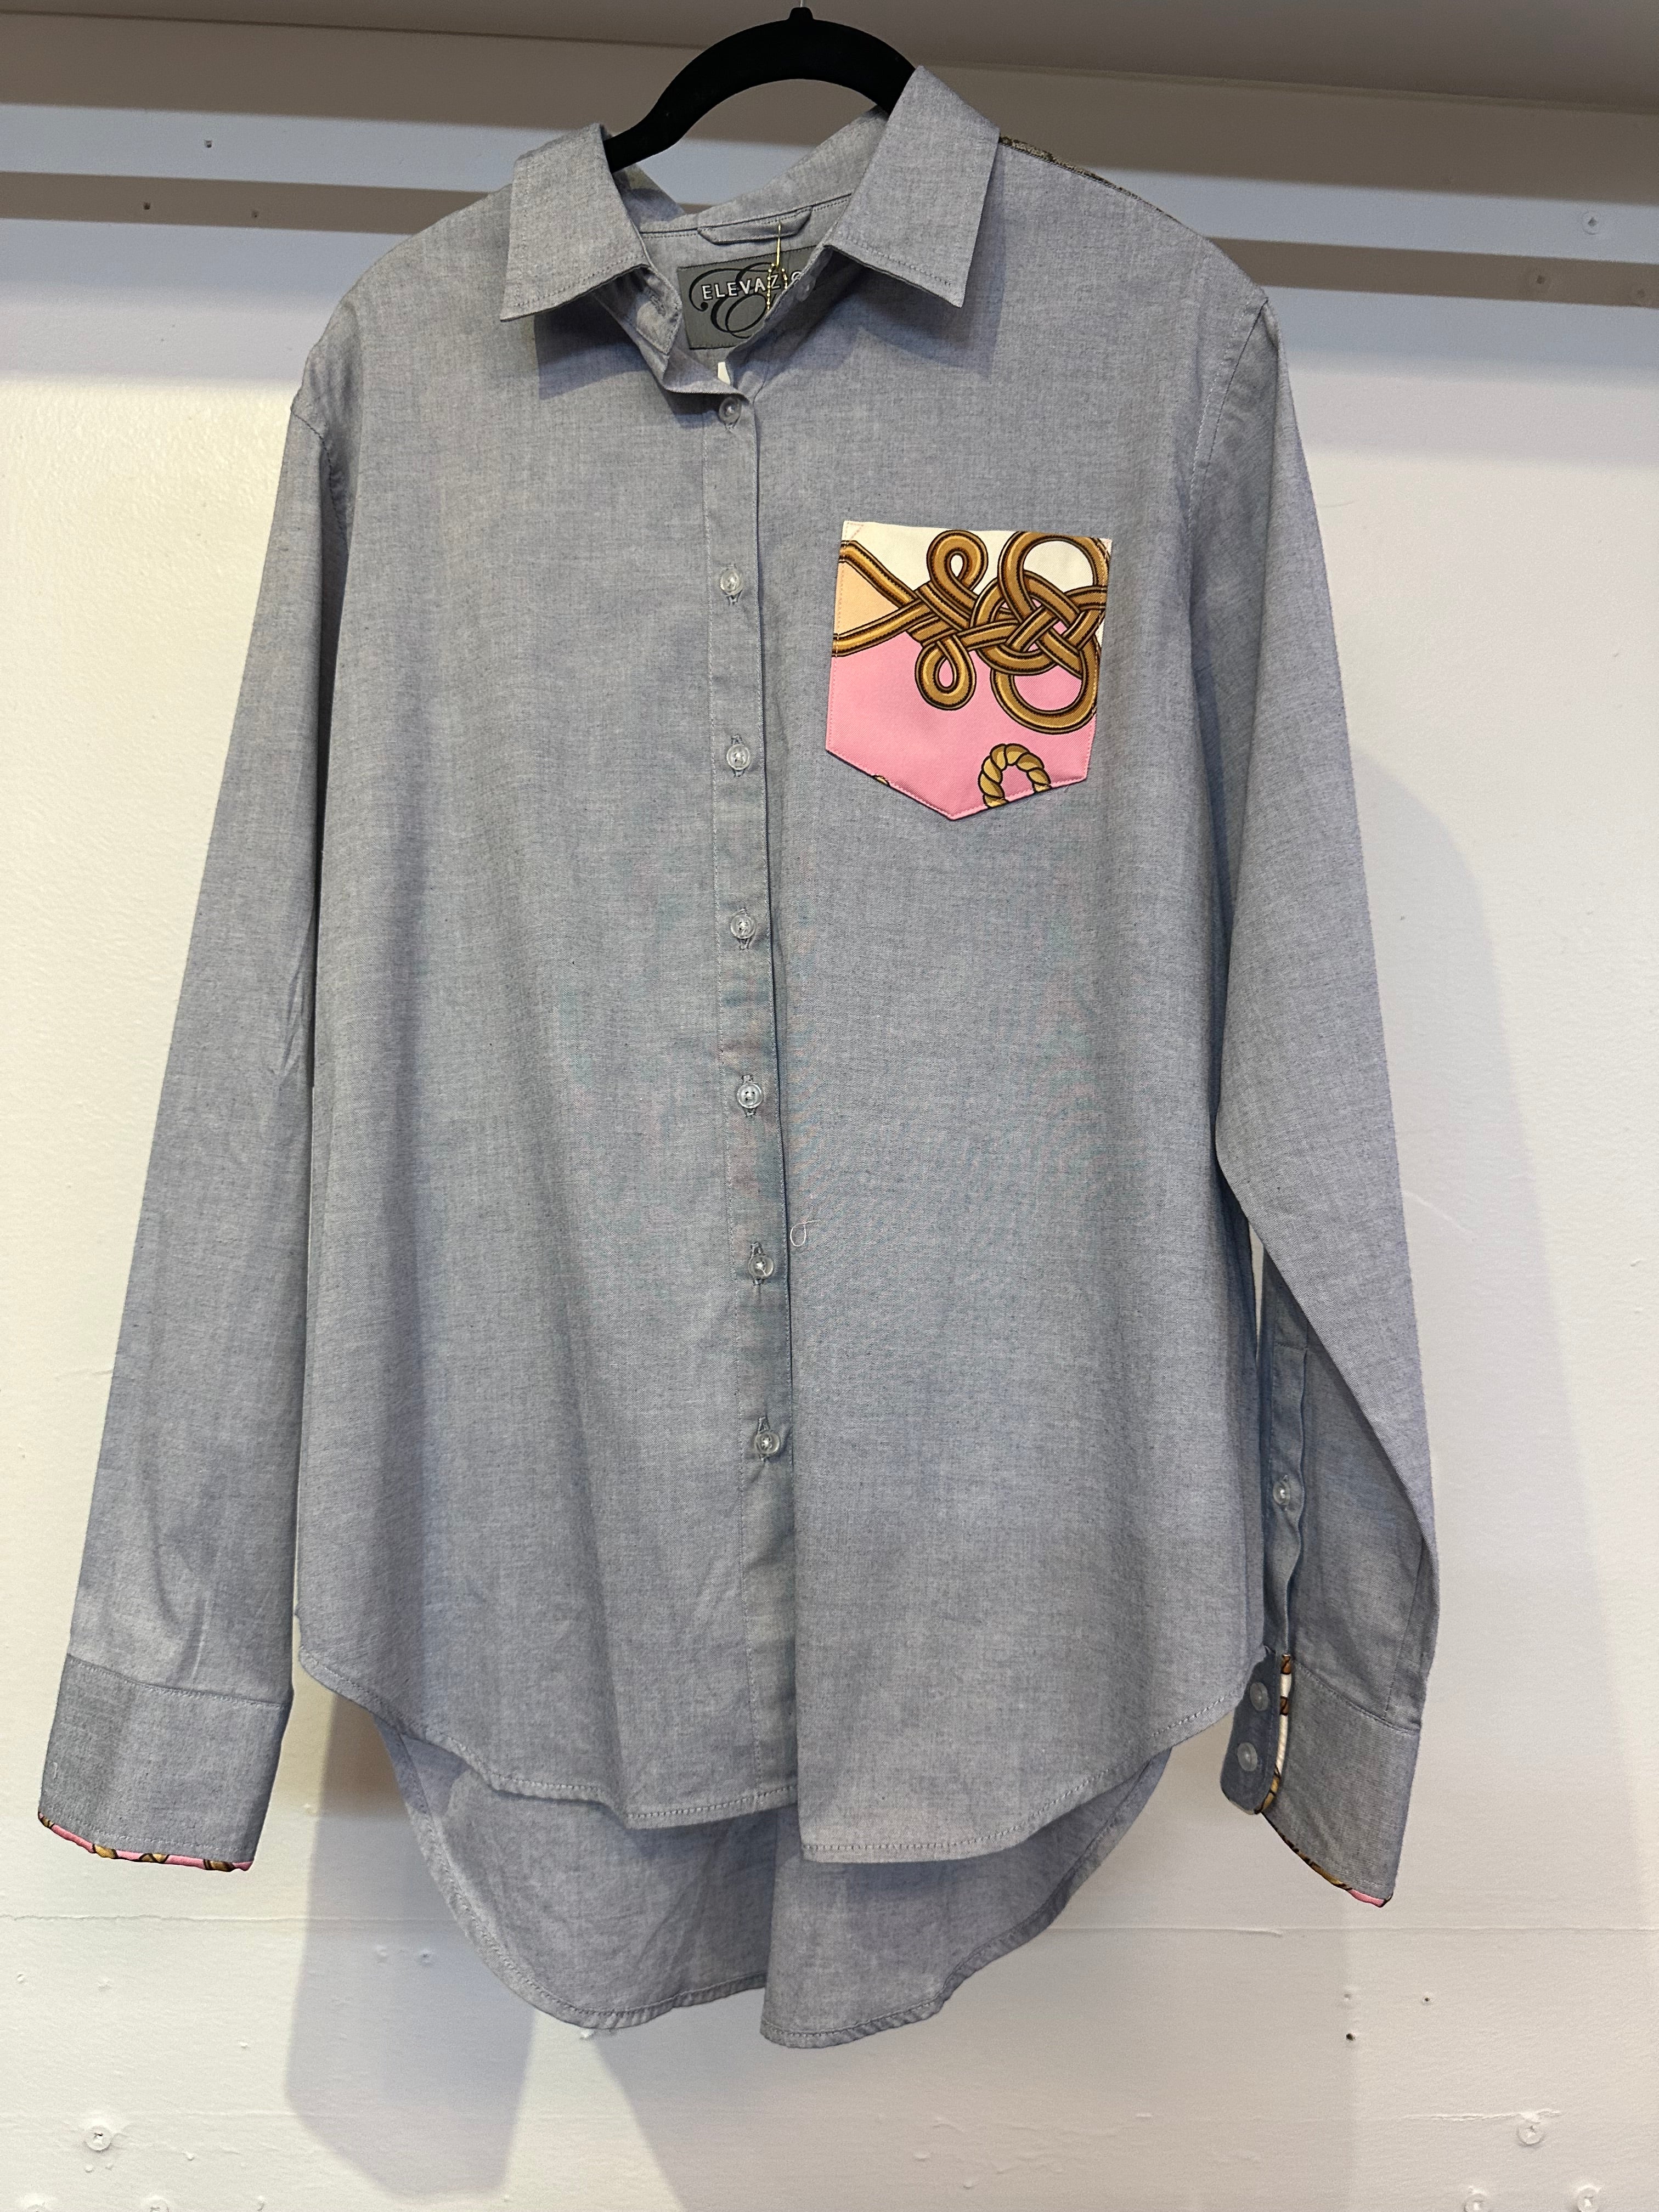 Repurposed Scarf Button Down - Blue Oxford with Pink Pocket